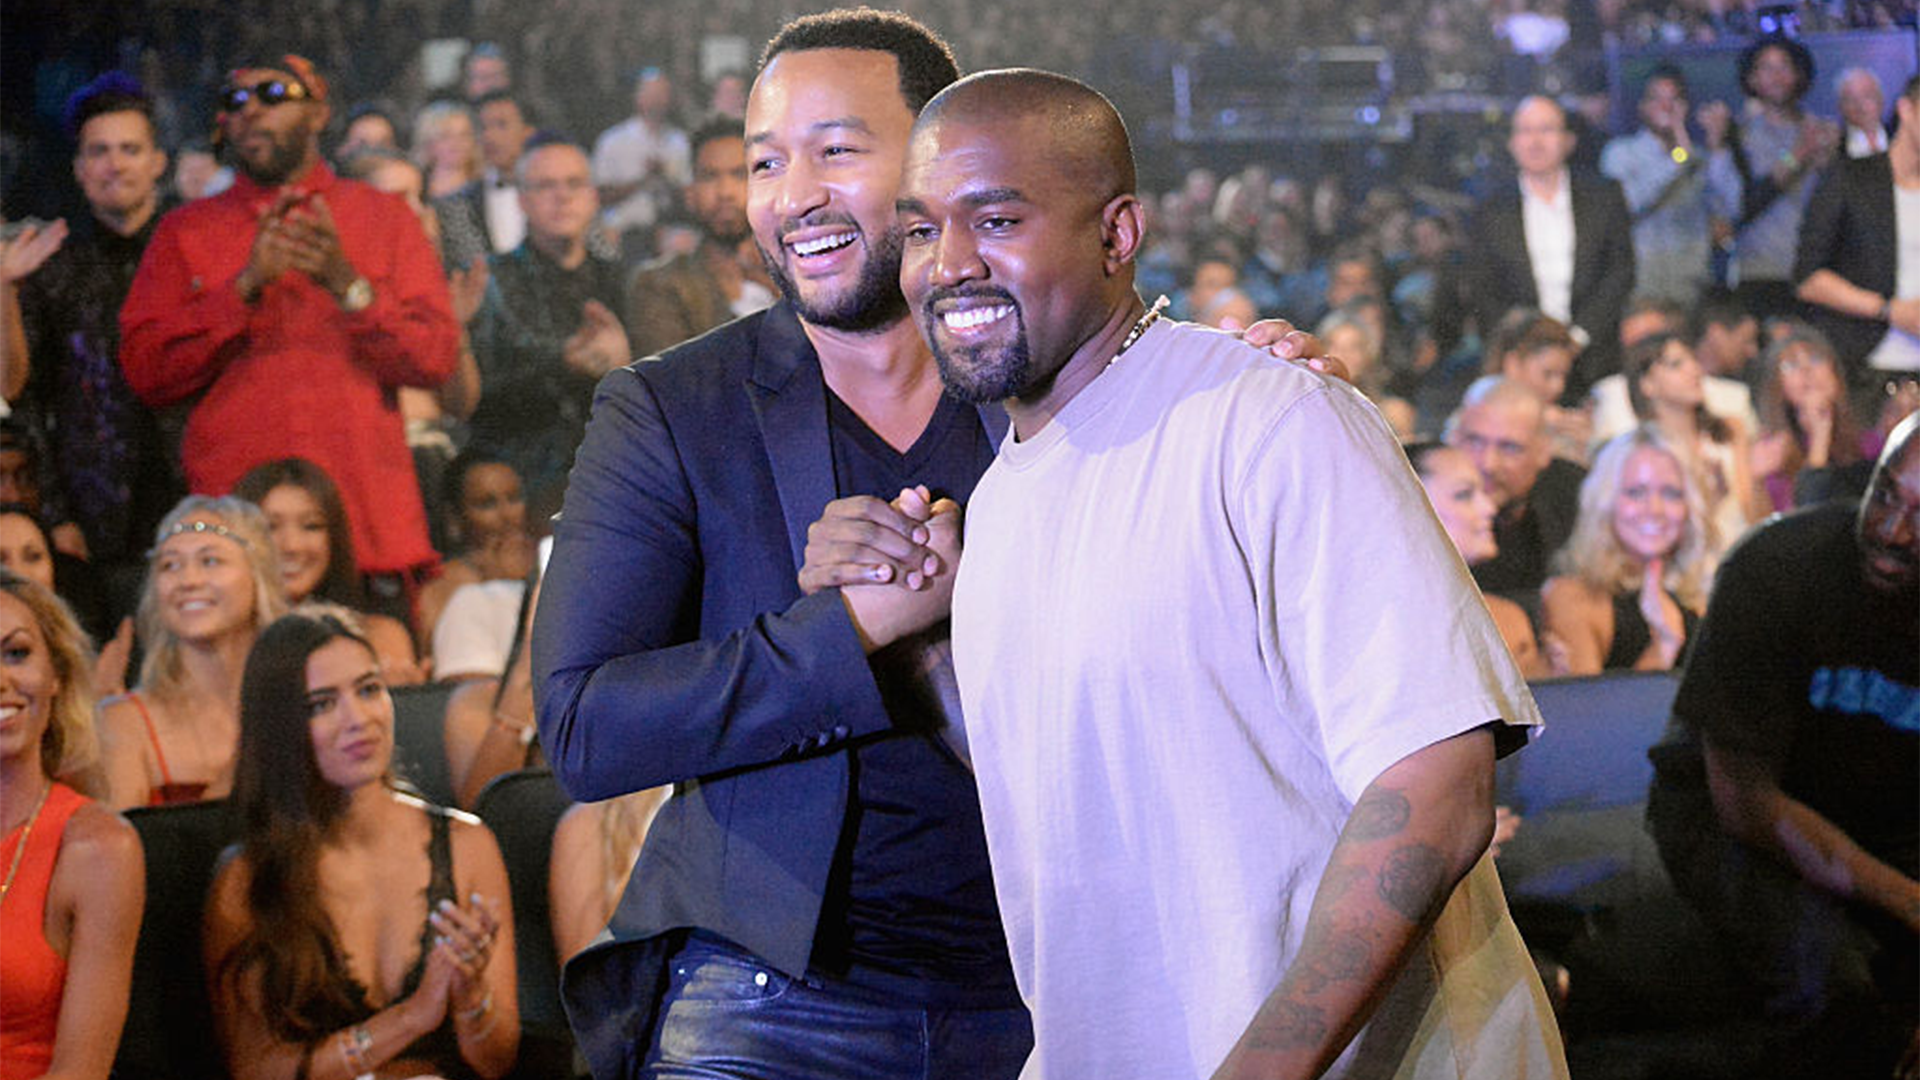 John Legend Shares How His Connection To Ye's Success Helped Boost His Own: 'I’d Get Really Lowball Offers For Record Deals'